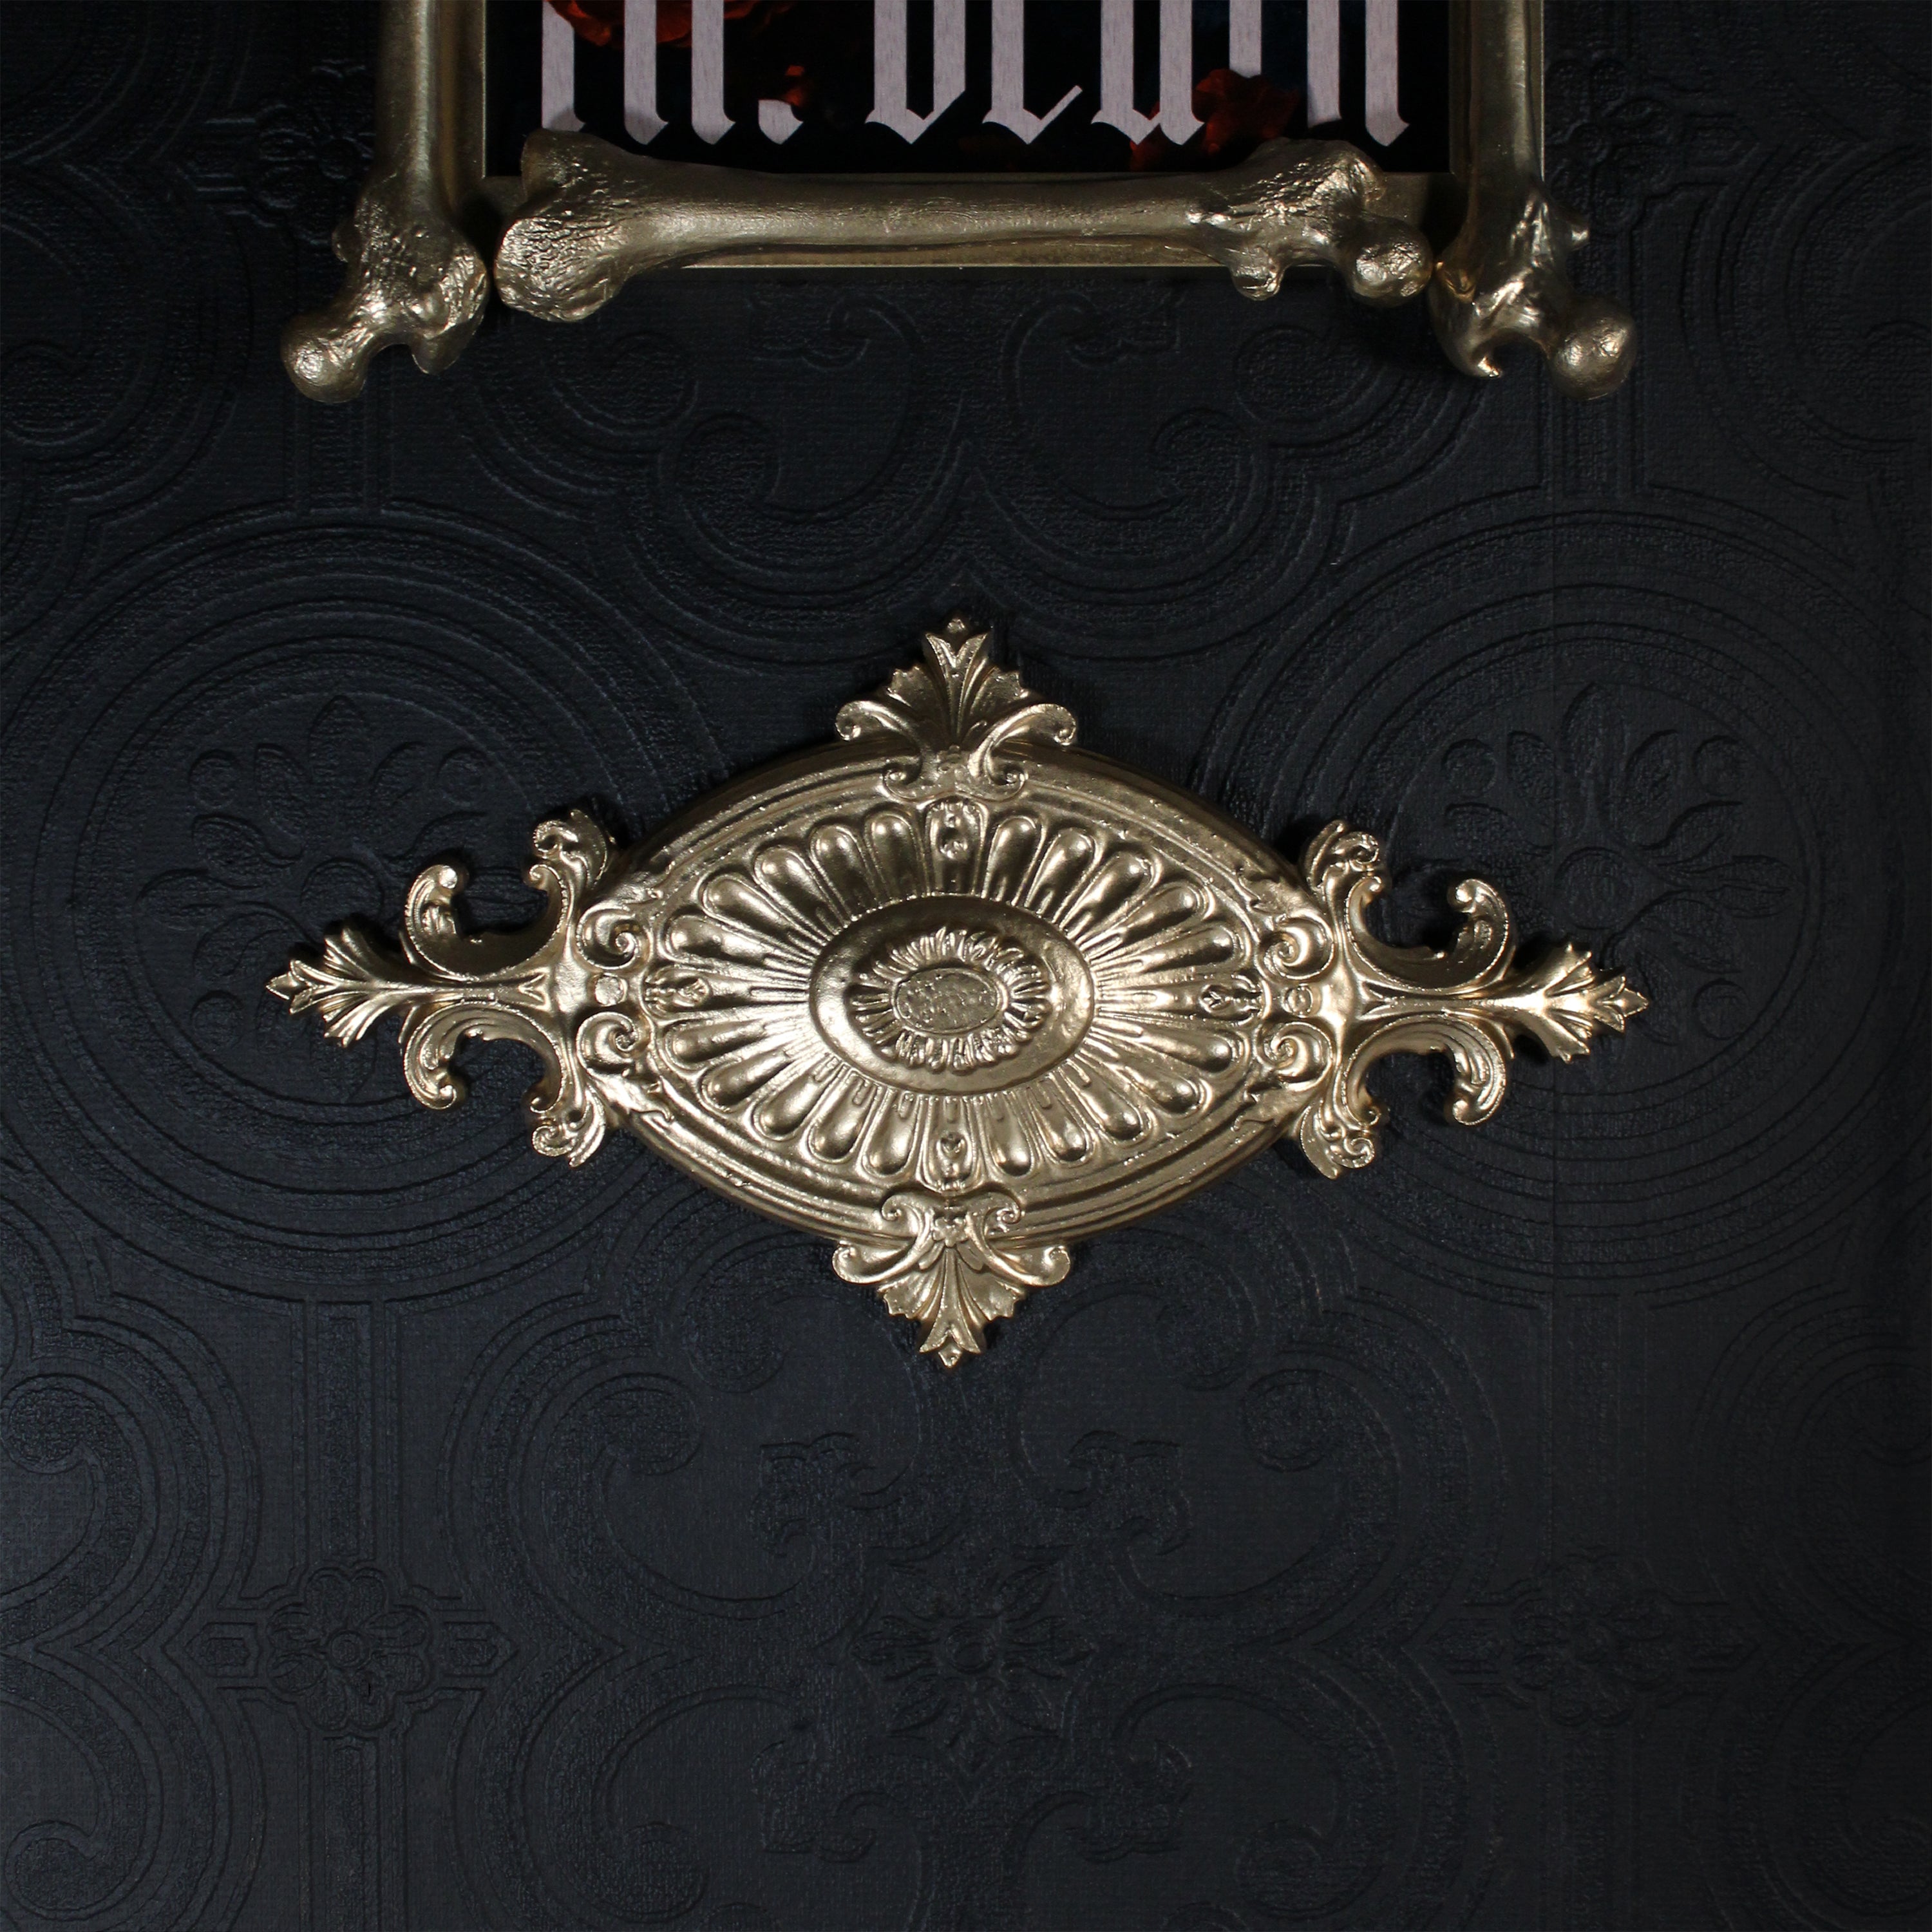 The Golden Reign baroque Plaque Wall Hanging handmade - The Blackened Teeth - Gothic decor